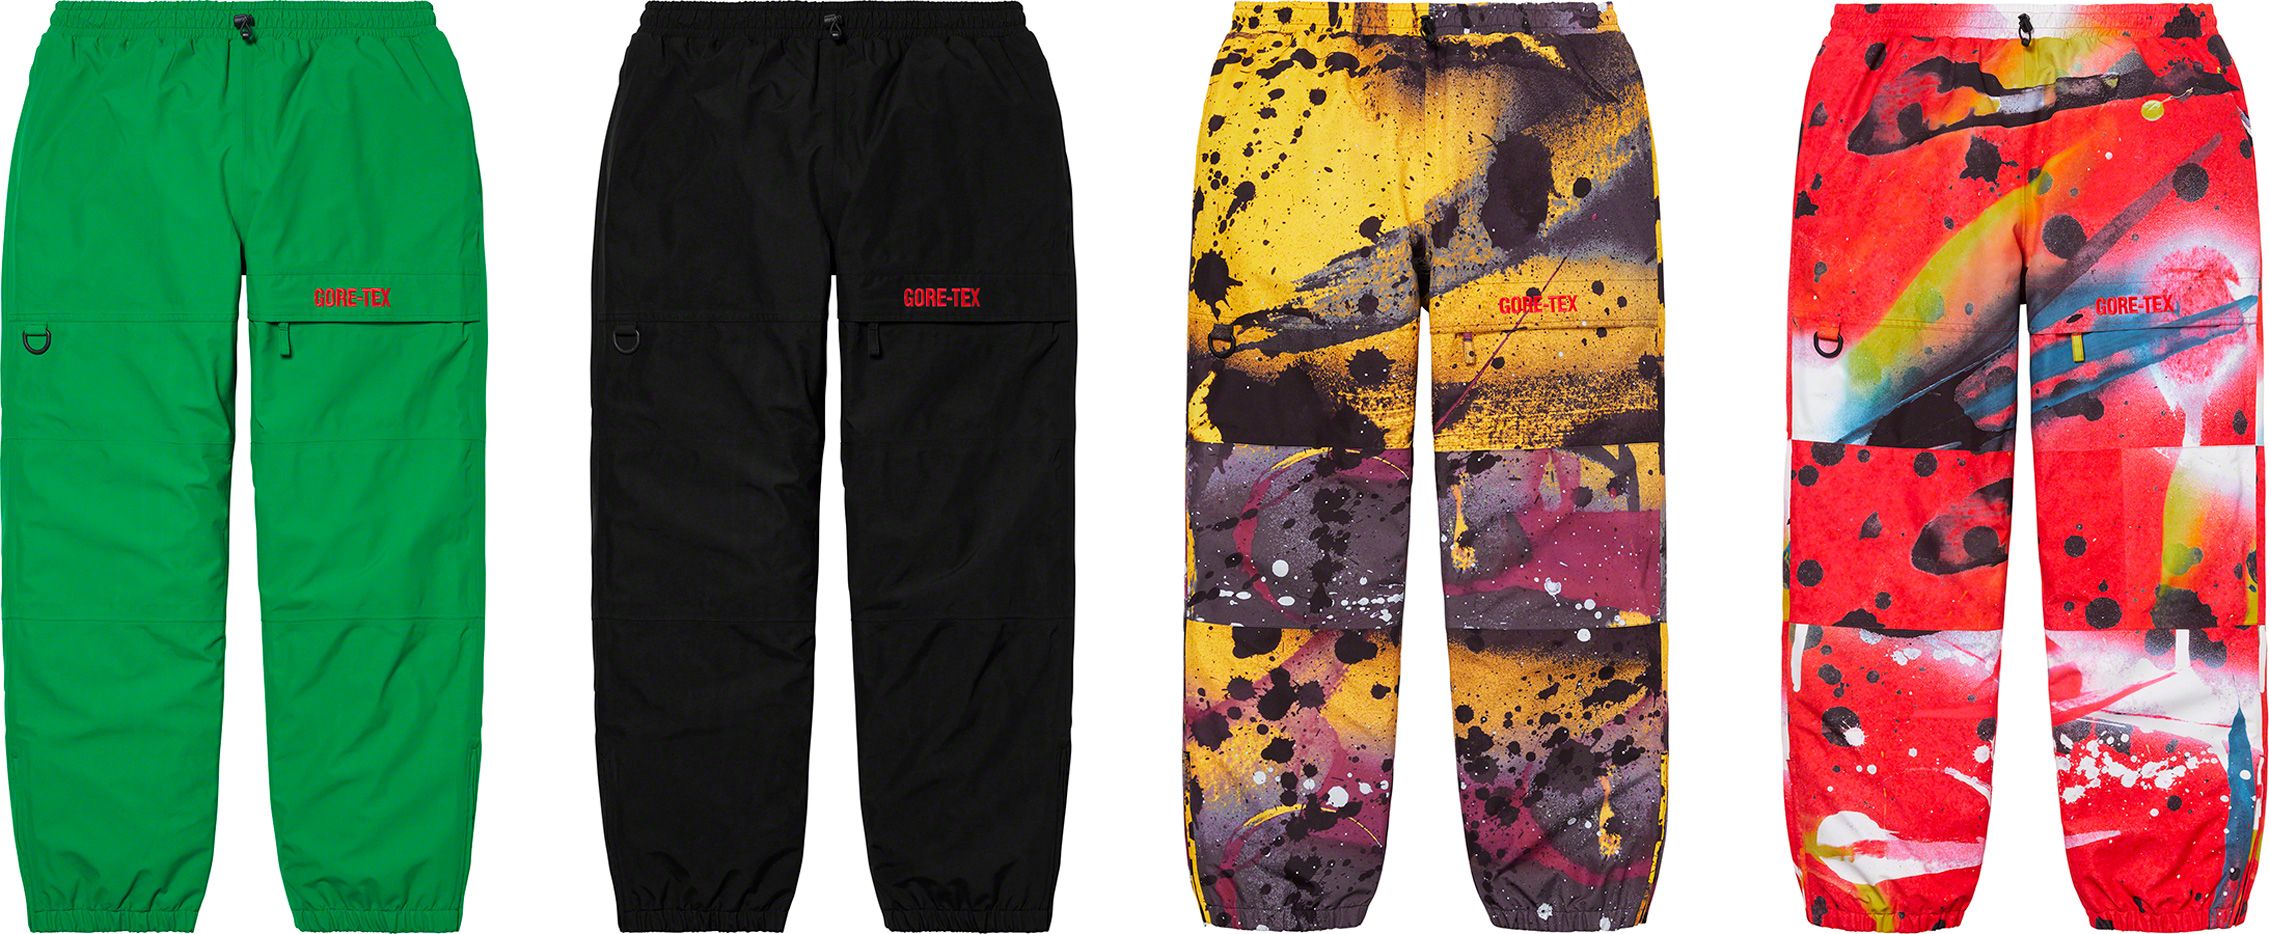 GORE-TEX Pant - Spring/Summer 2020 Preview – Supreme